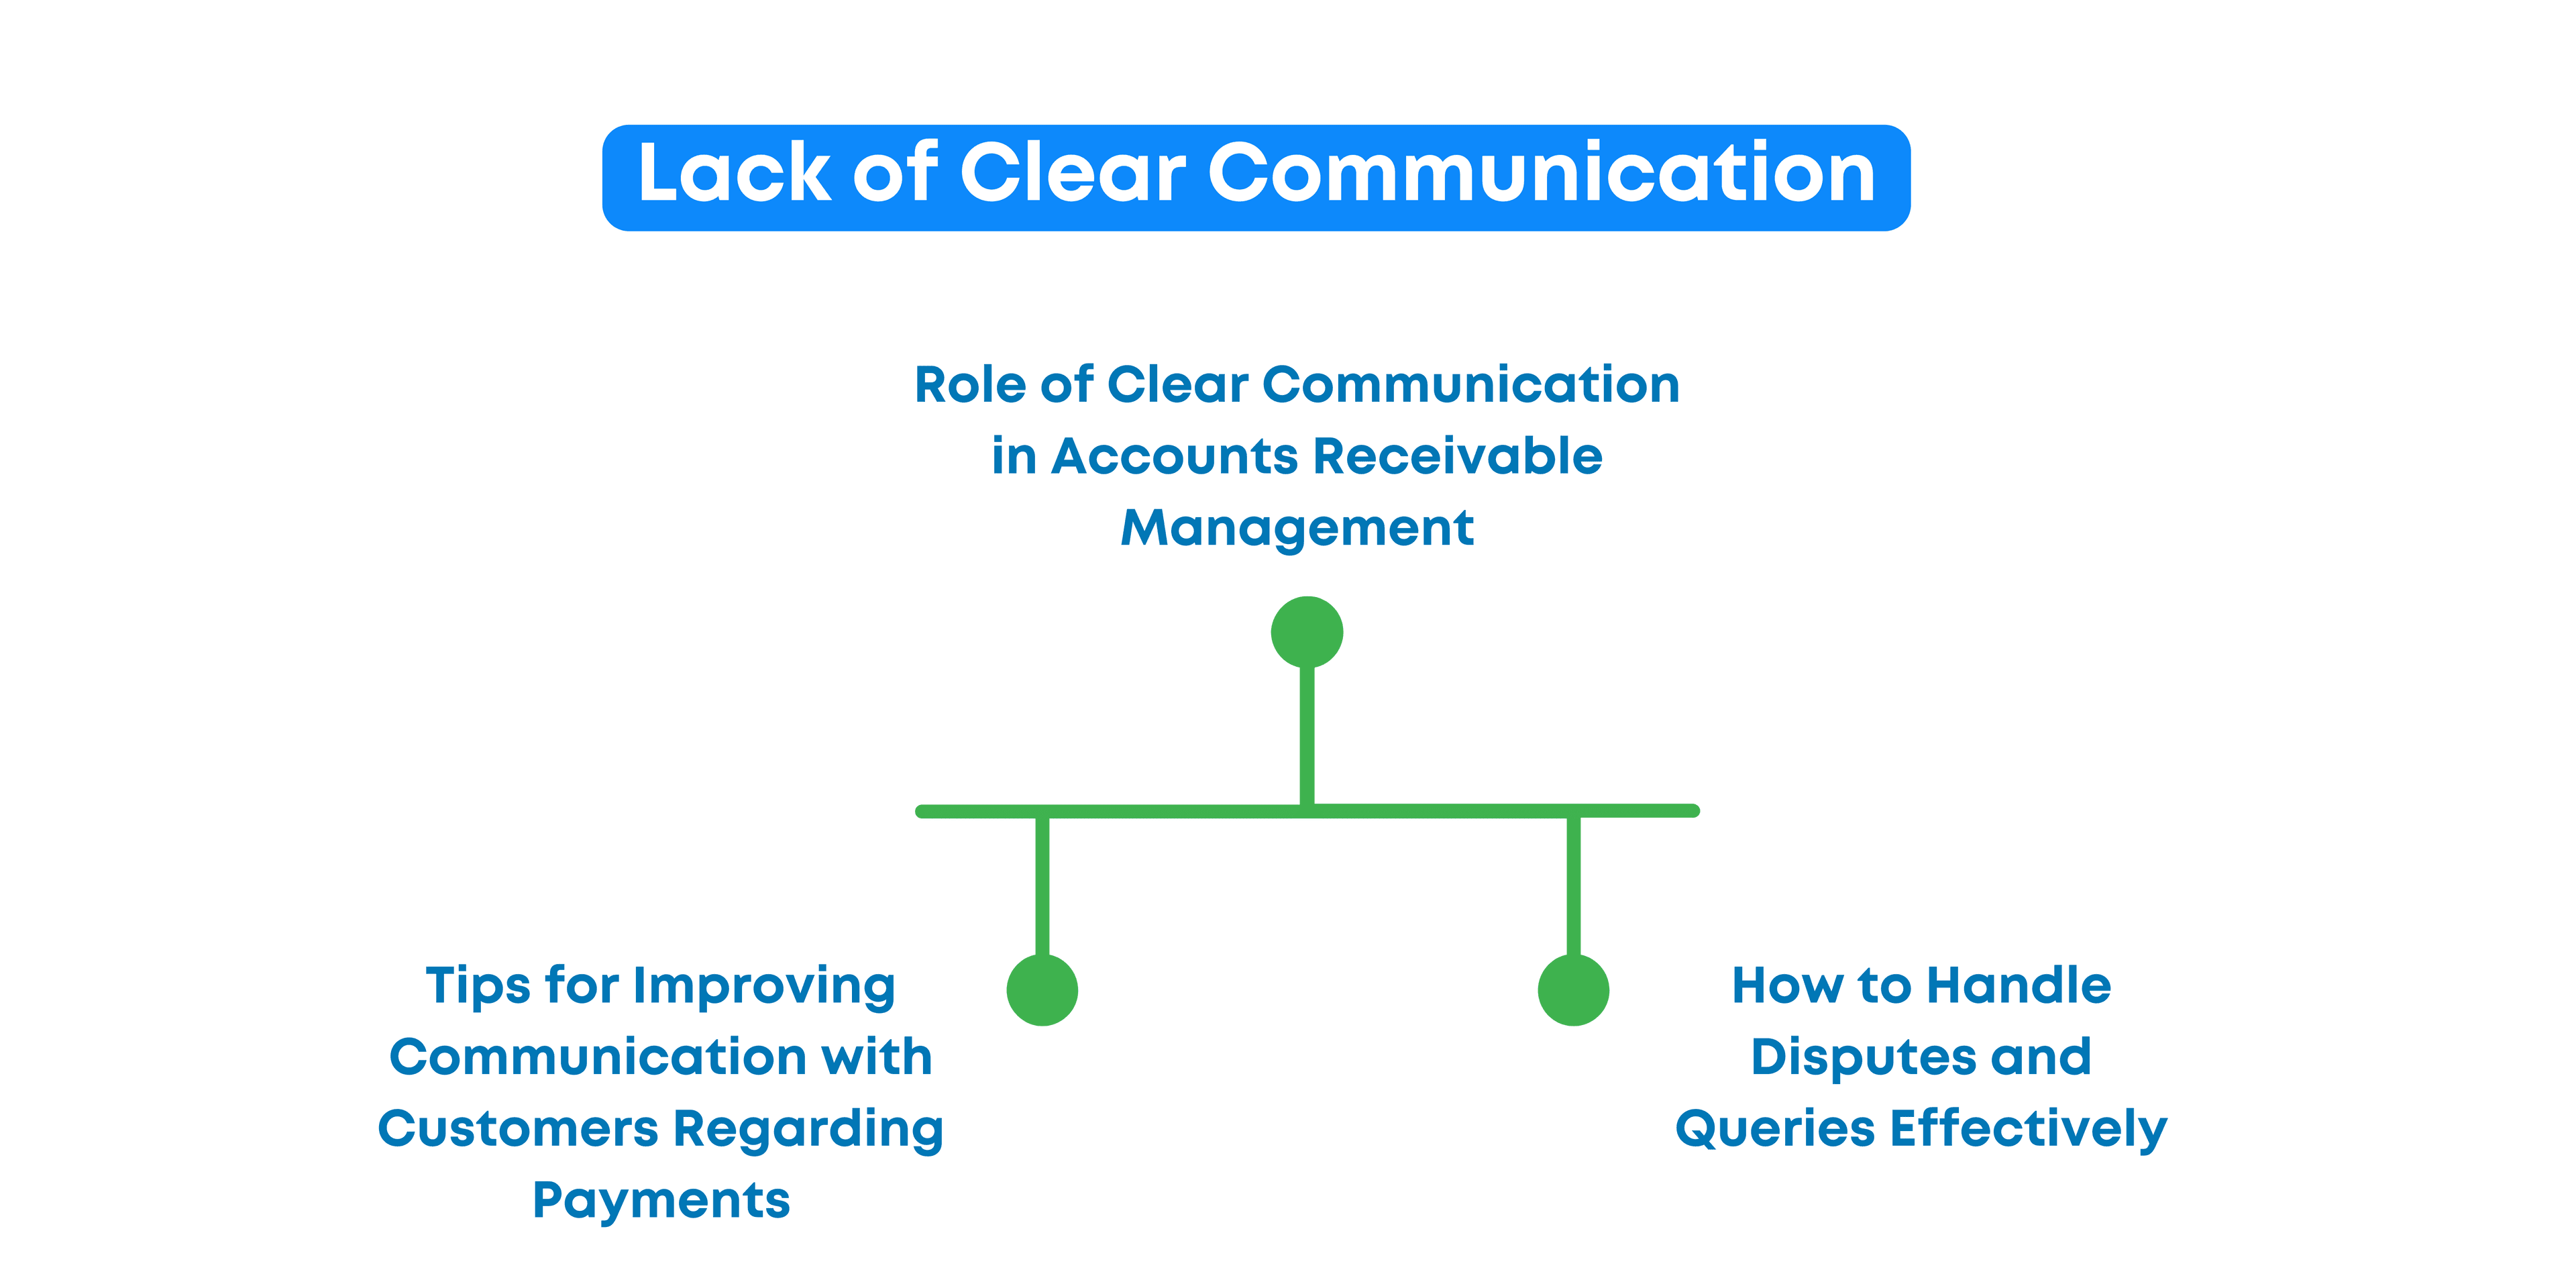 Lack of Clear Communication